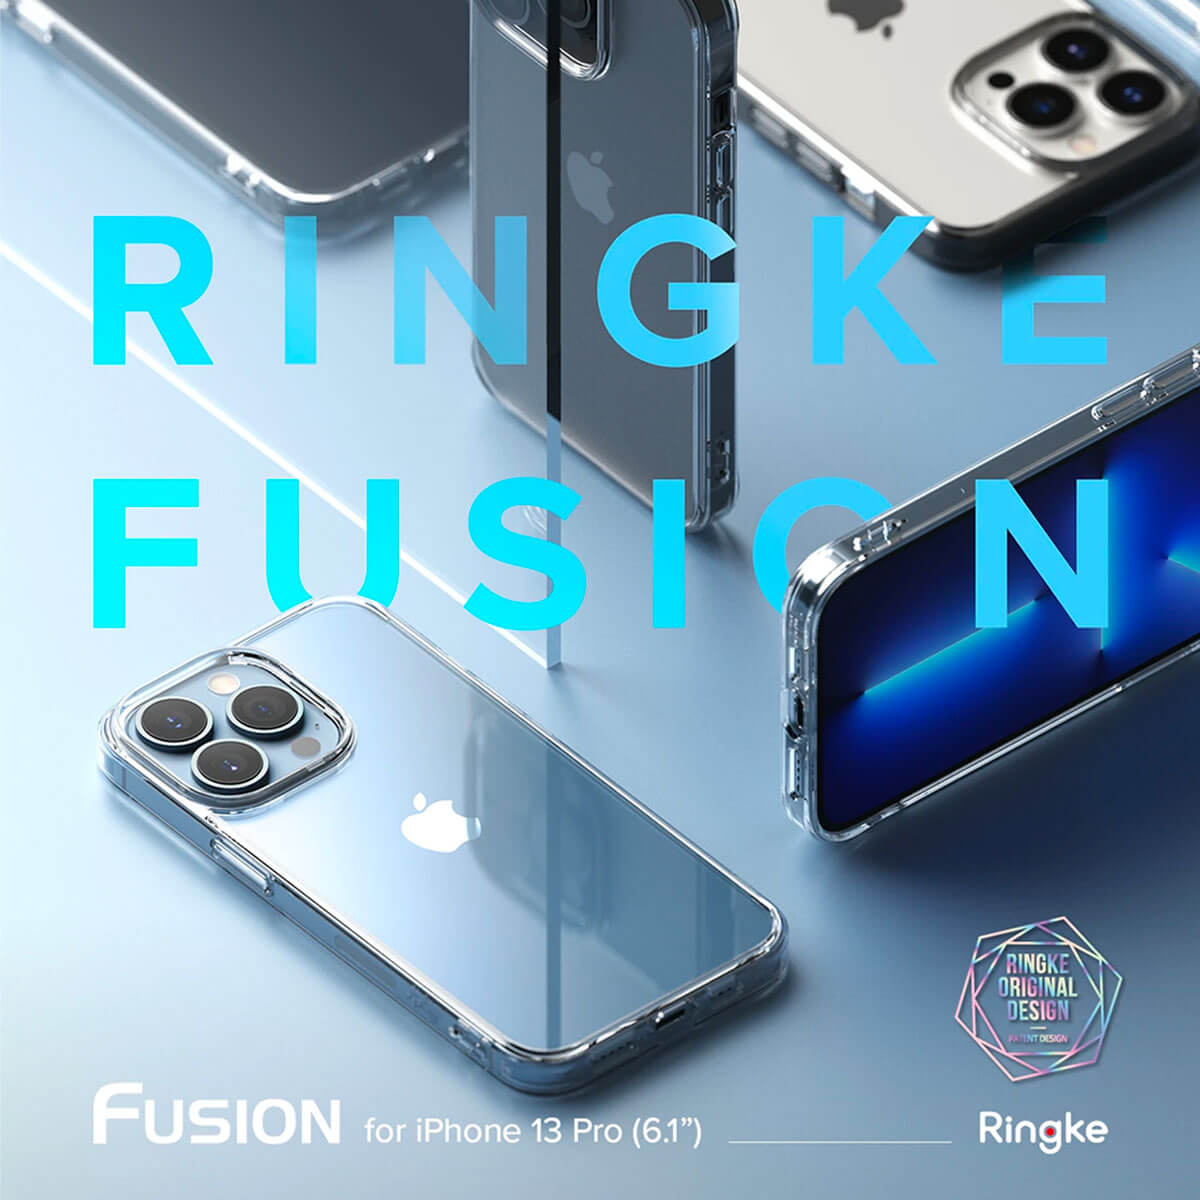 Ringke iPhone 13 Pro Max Case Fusion Clear